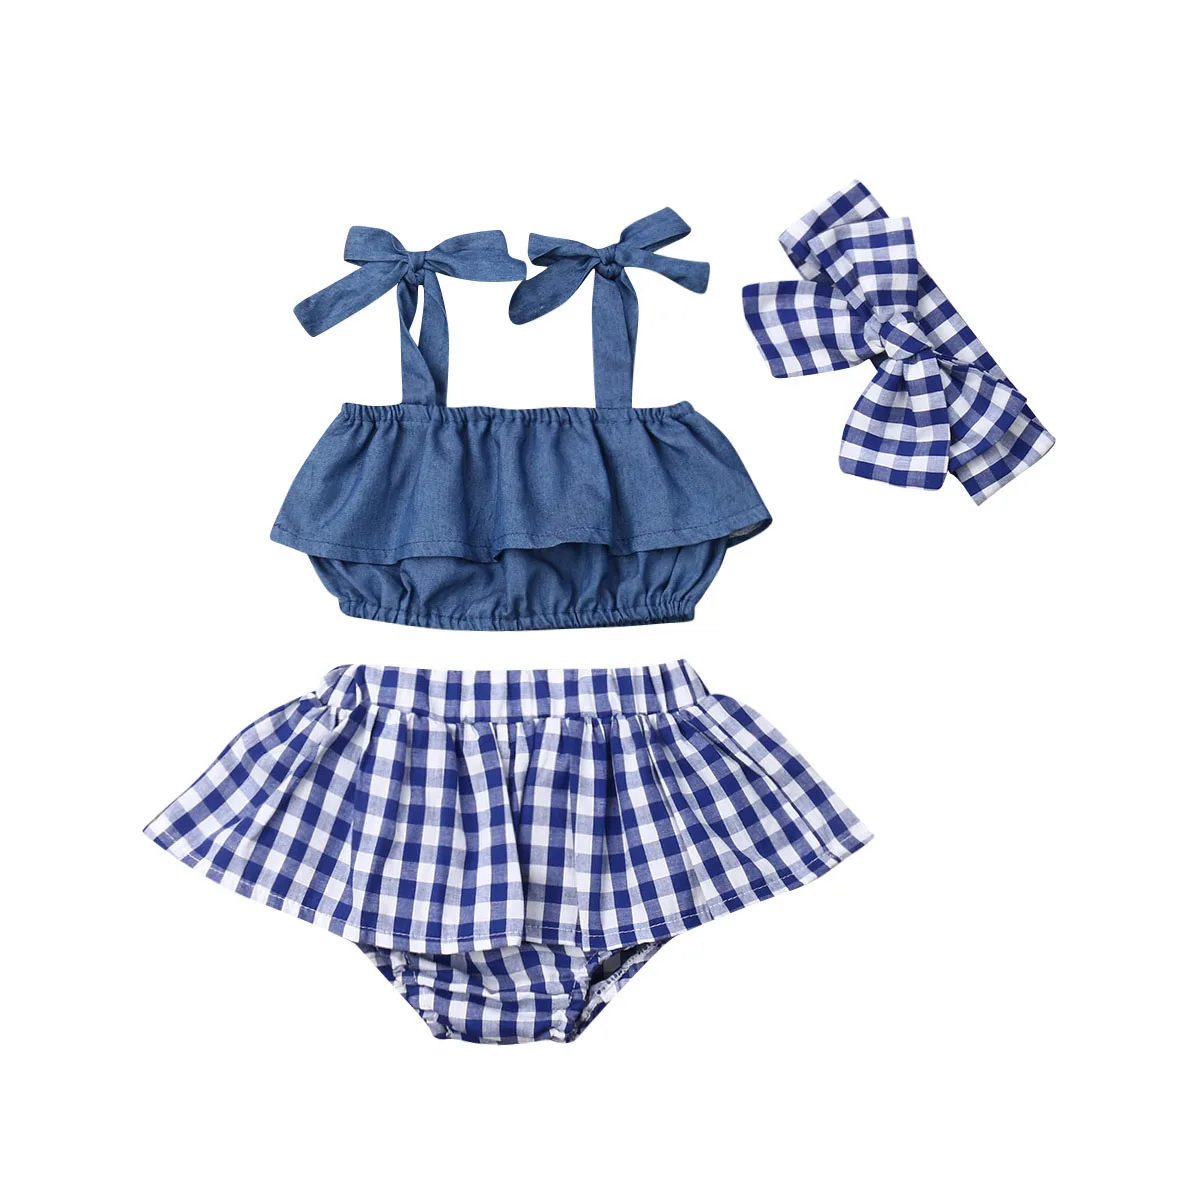 New Fashion Newborn Clothes Sets Baby Girl Sling Ruffle Crop Top Girls Plaid Mini Skirt Headband 3Pcs Outfits Clothes images - 6